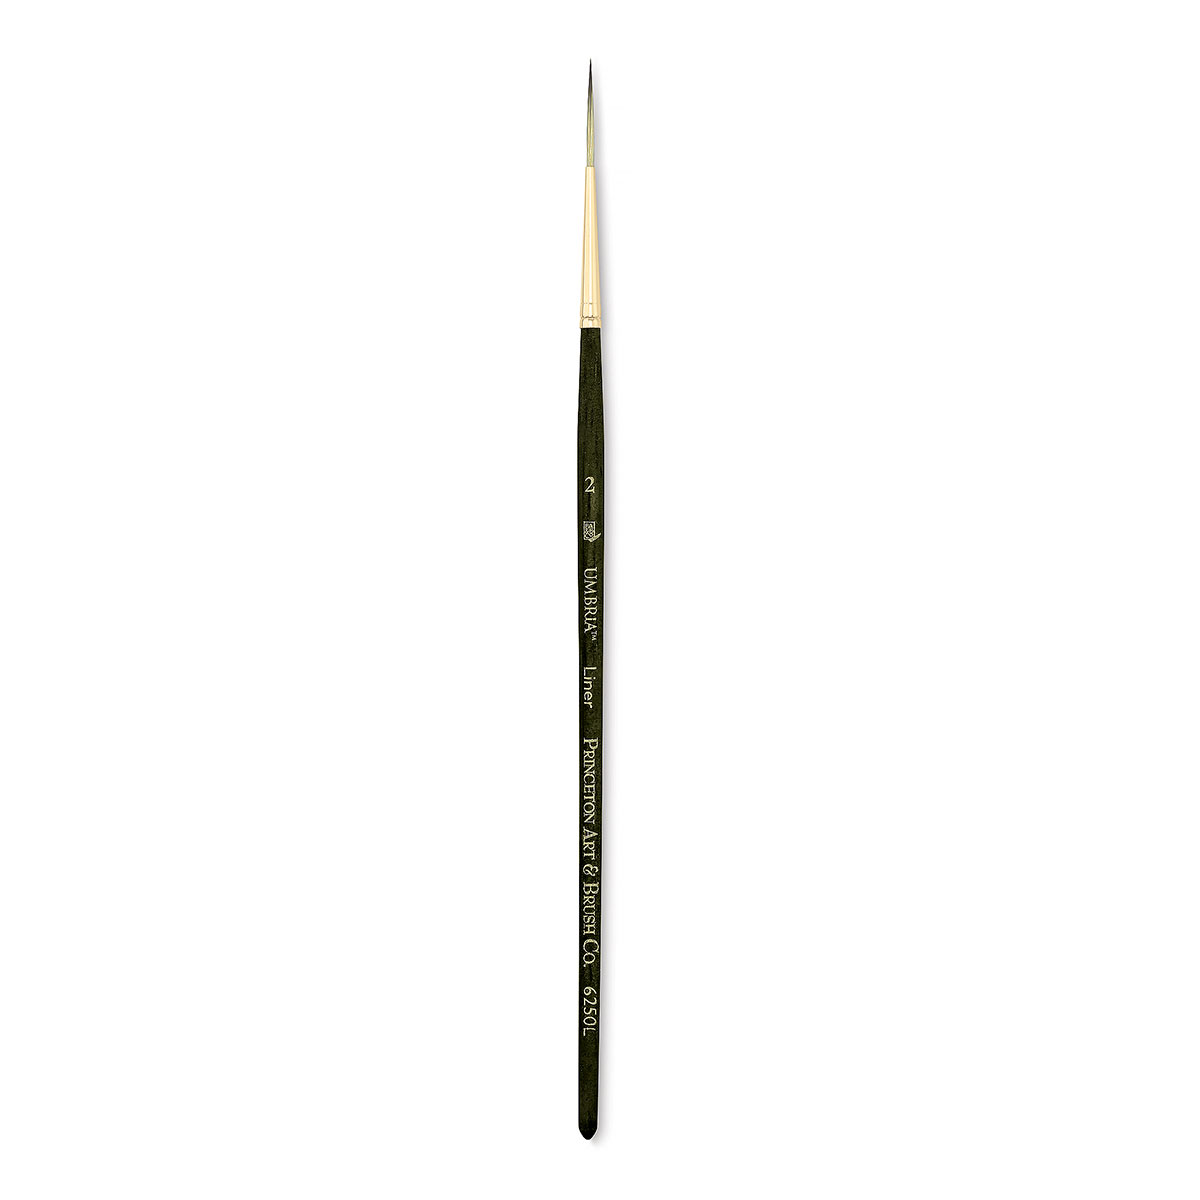 Princeton Umbria Short Handle Synthetic Paint Brush for Watercolor, Acrylic  and Oil, Series 6250, Flat, 6